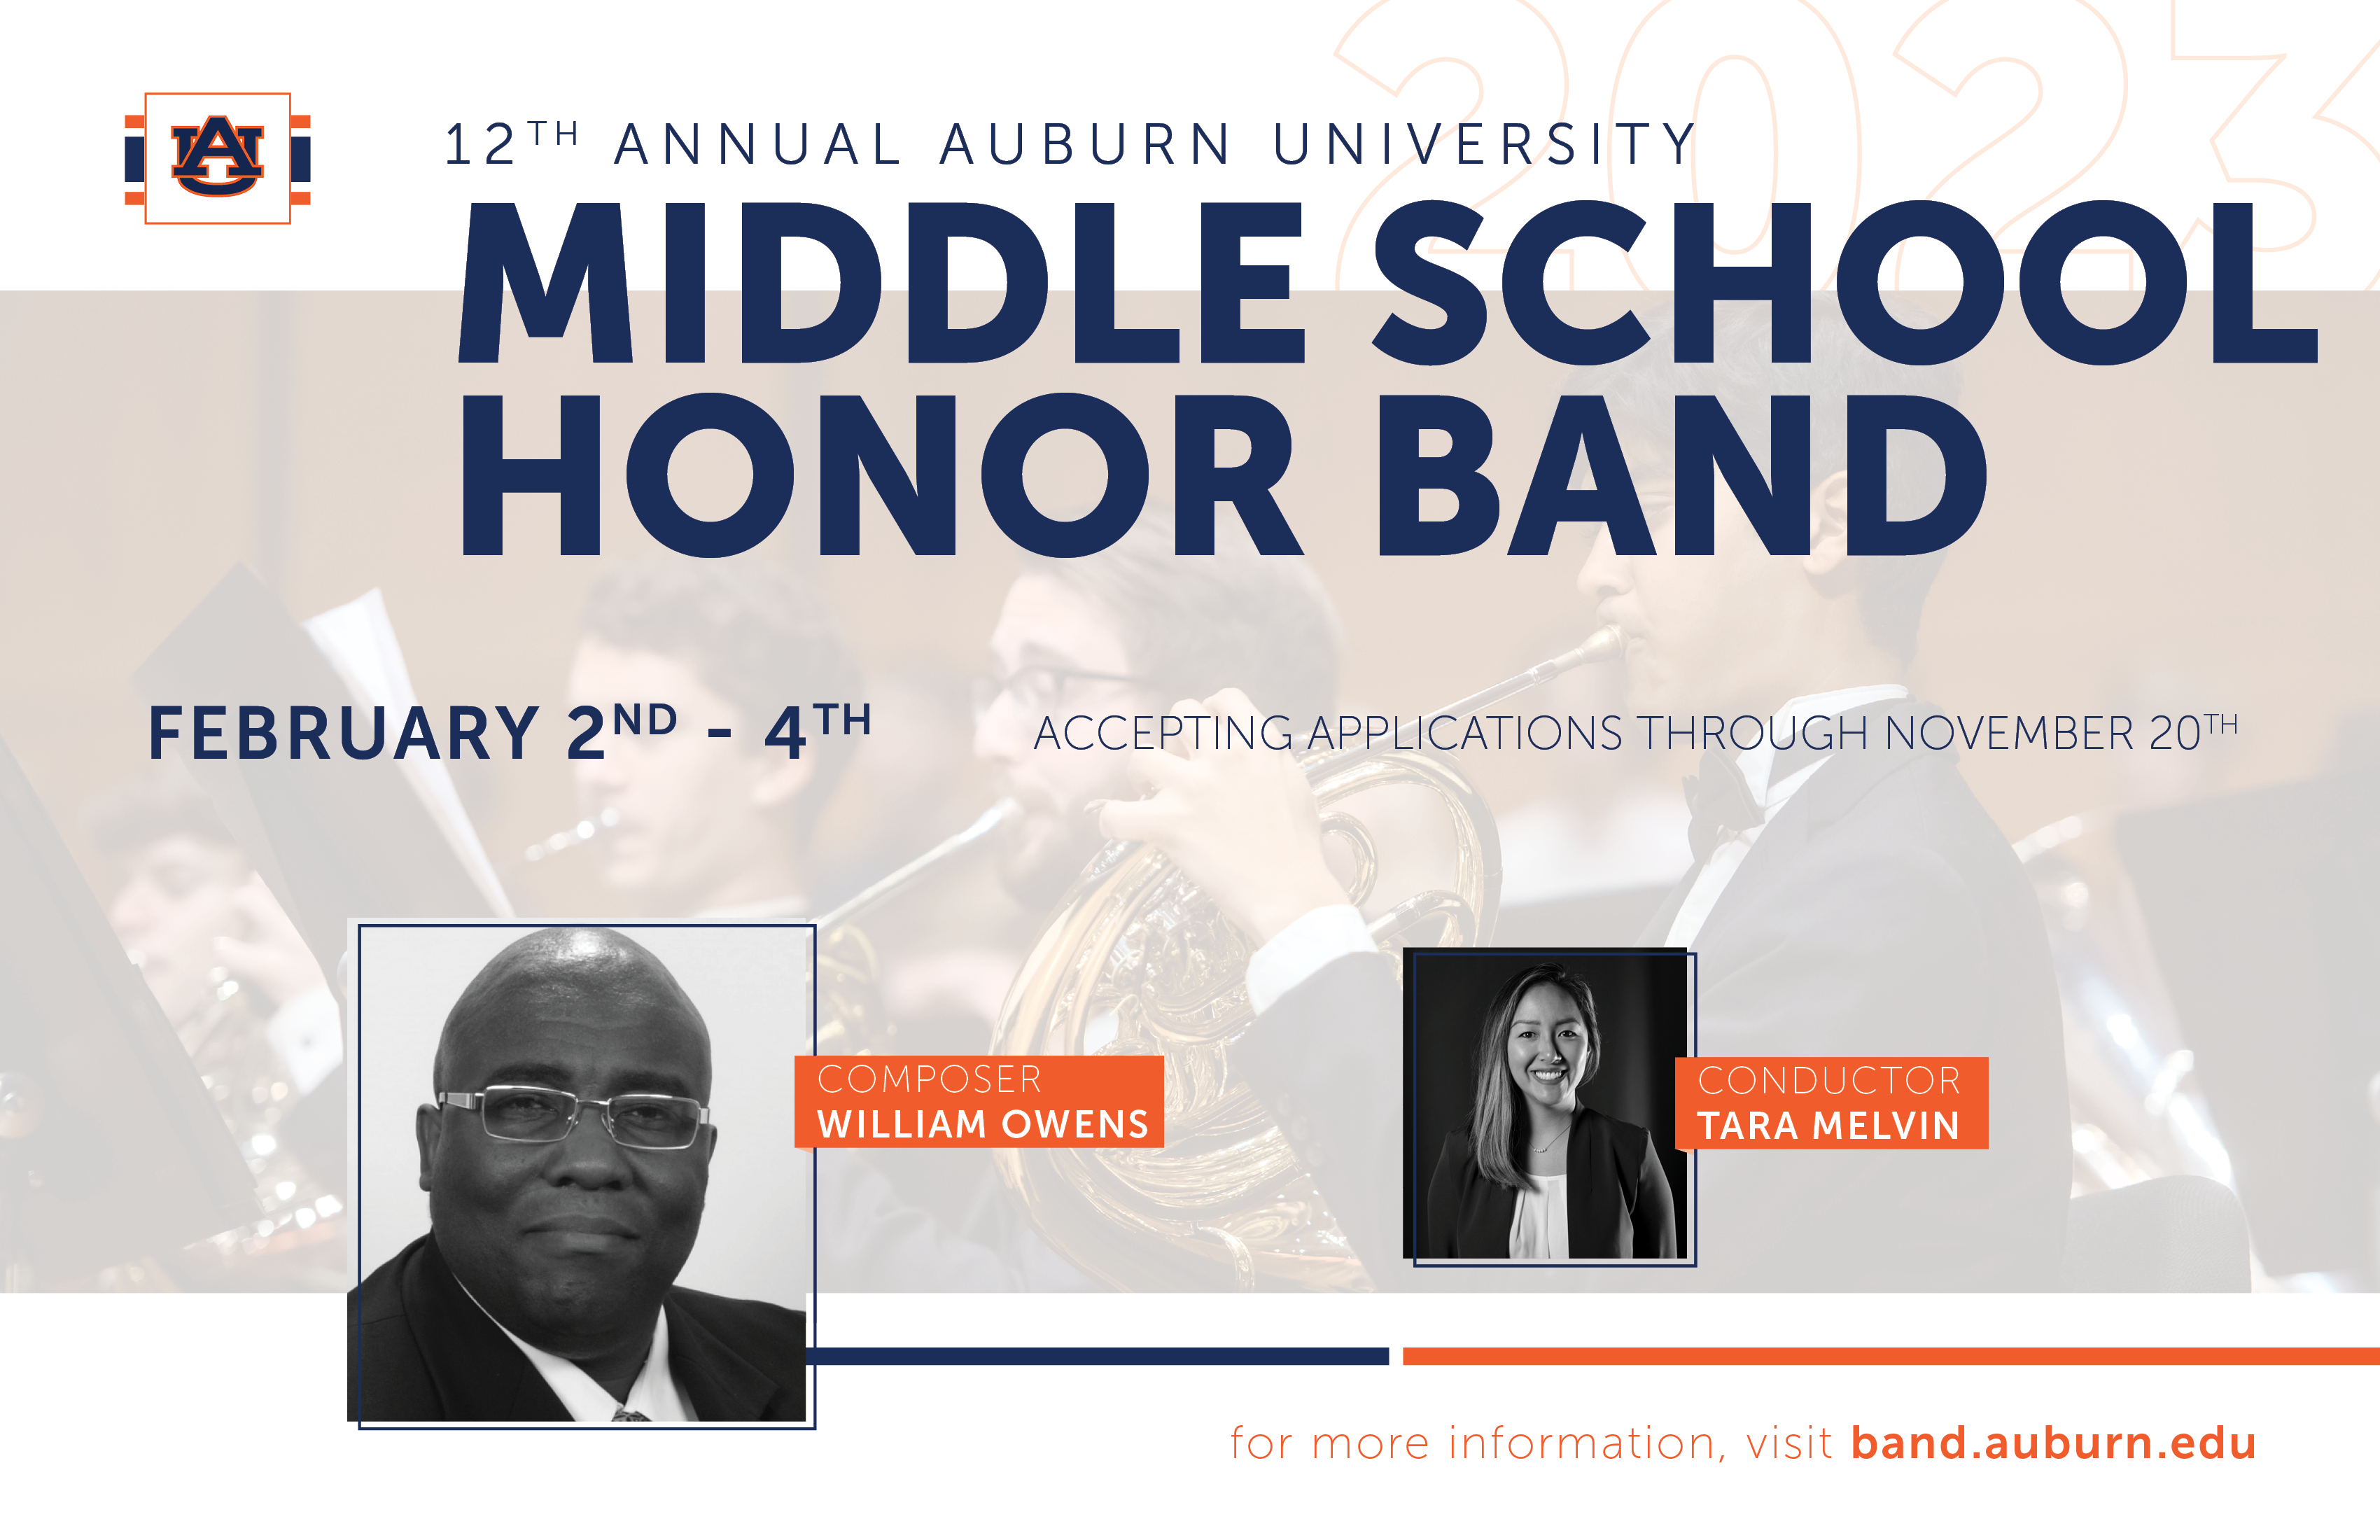 Middle School Honor Band, Feb 2 - 4